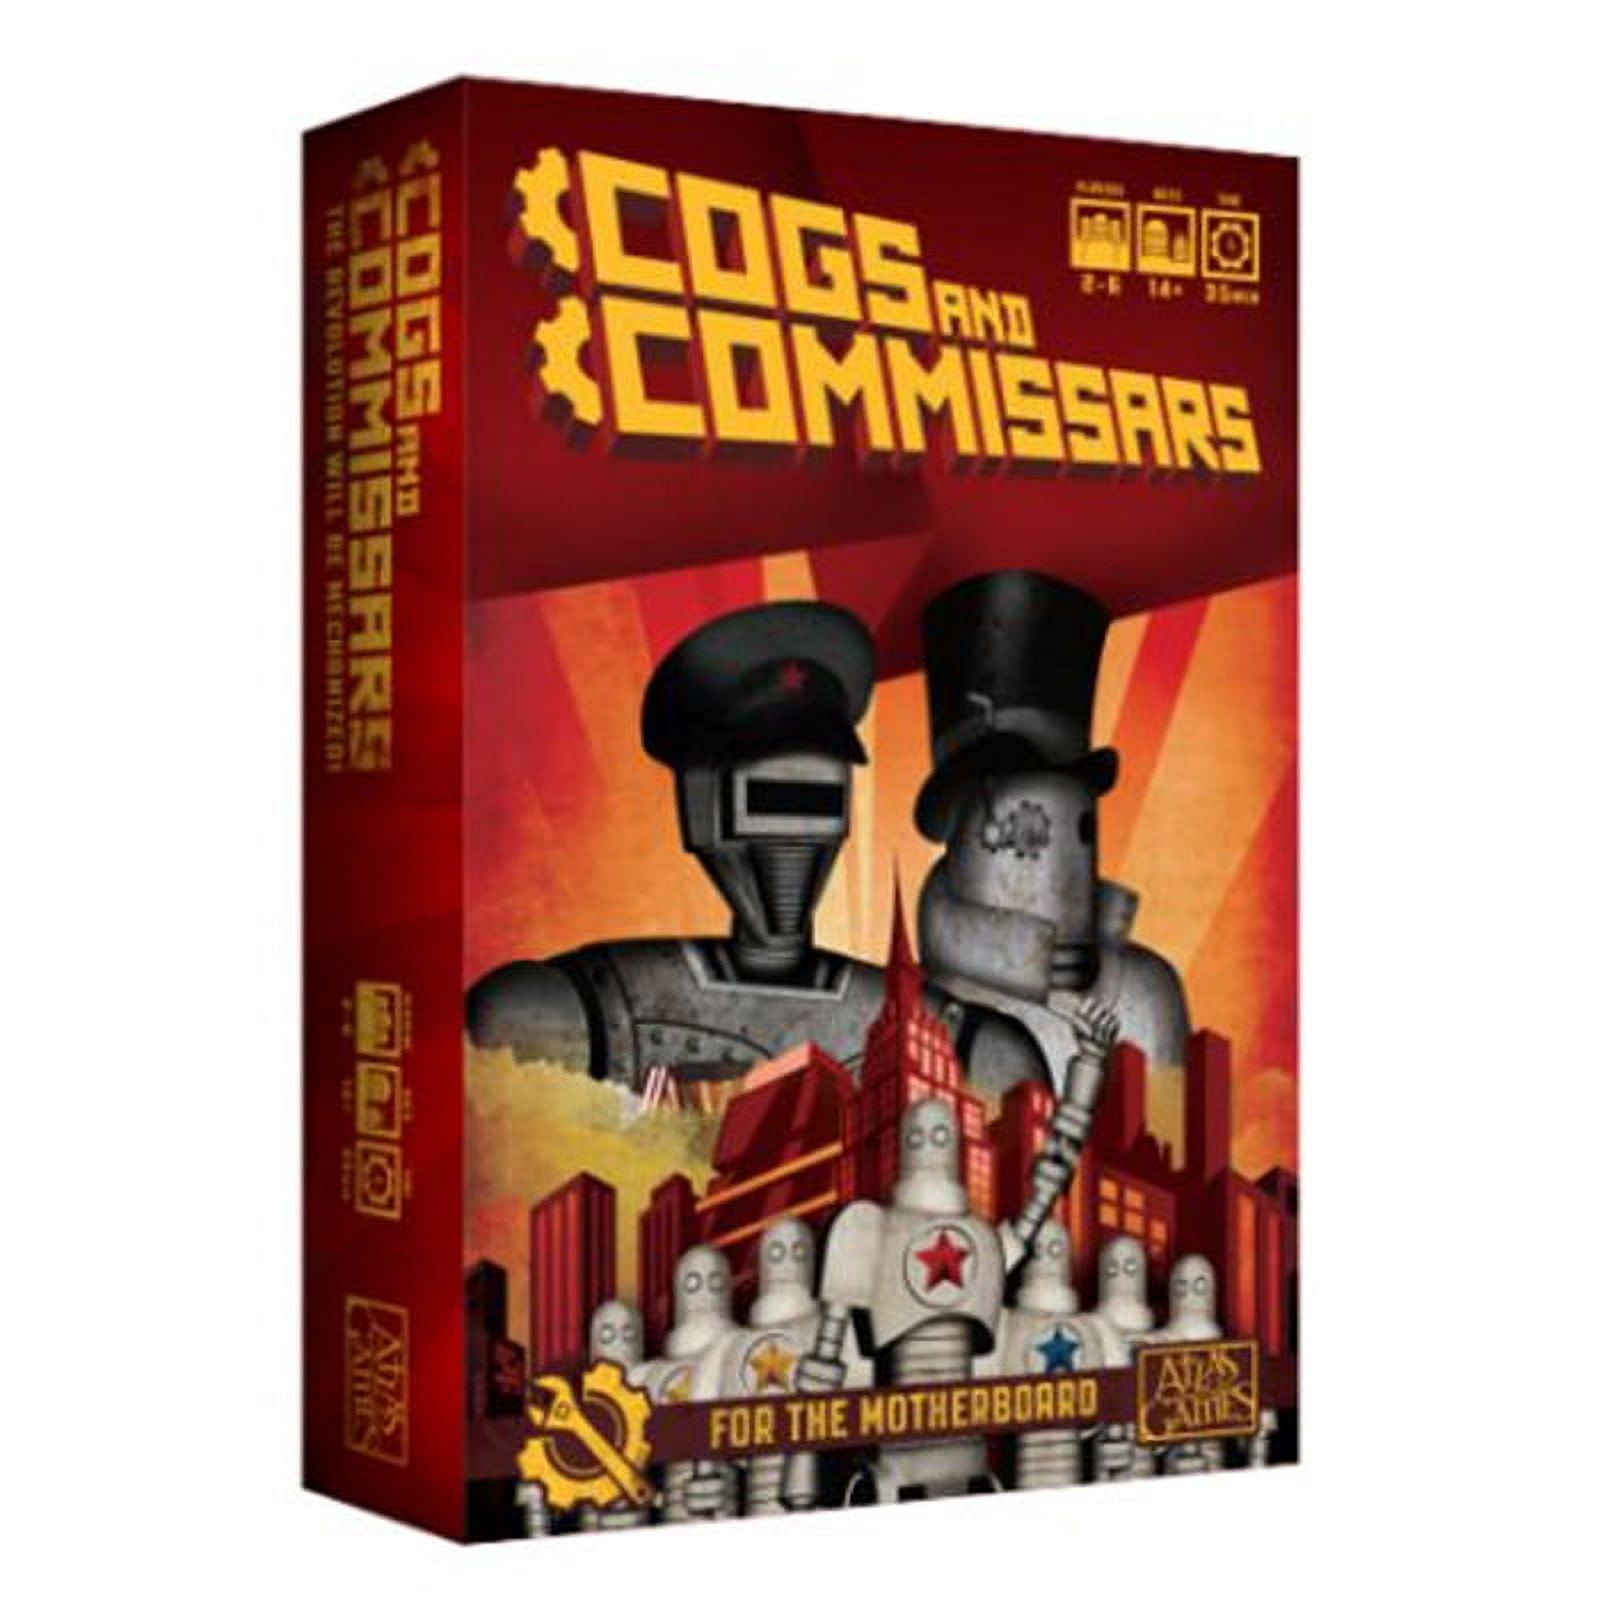 Atg1430 Cogs & Commissars Board Game